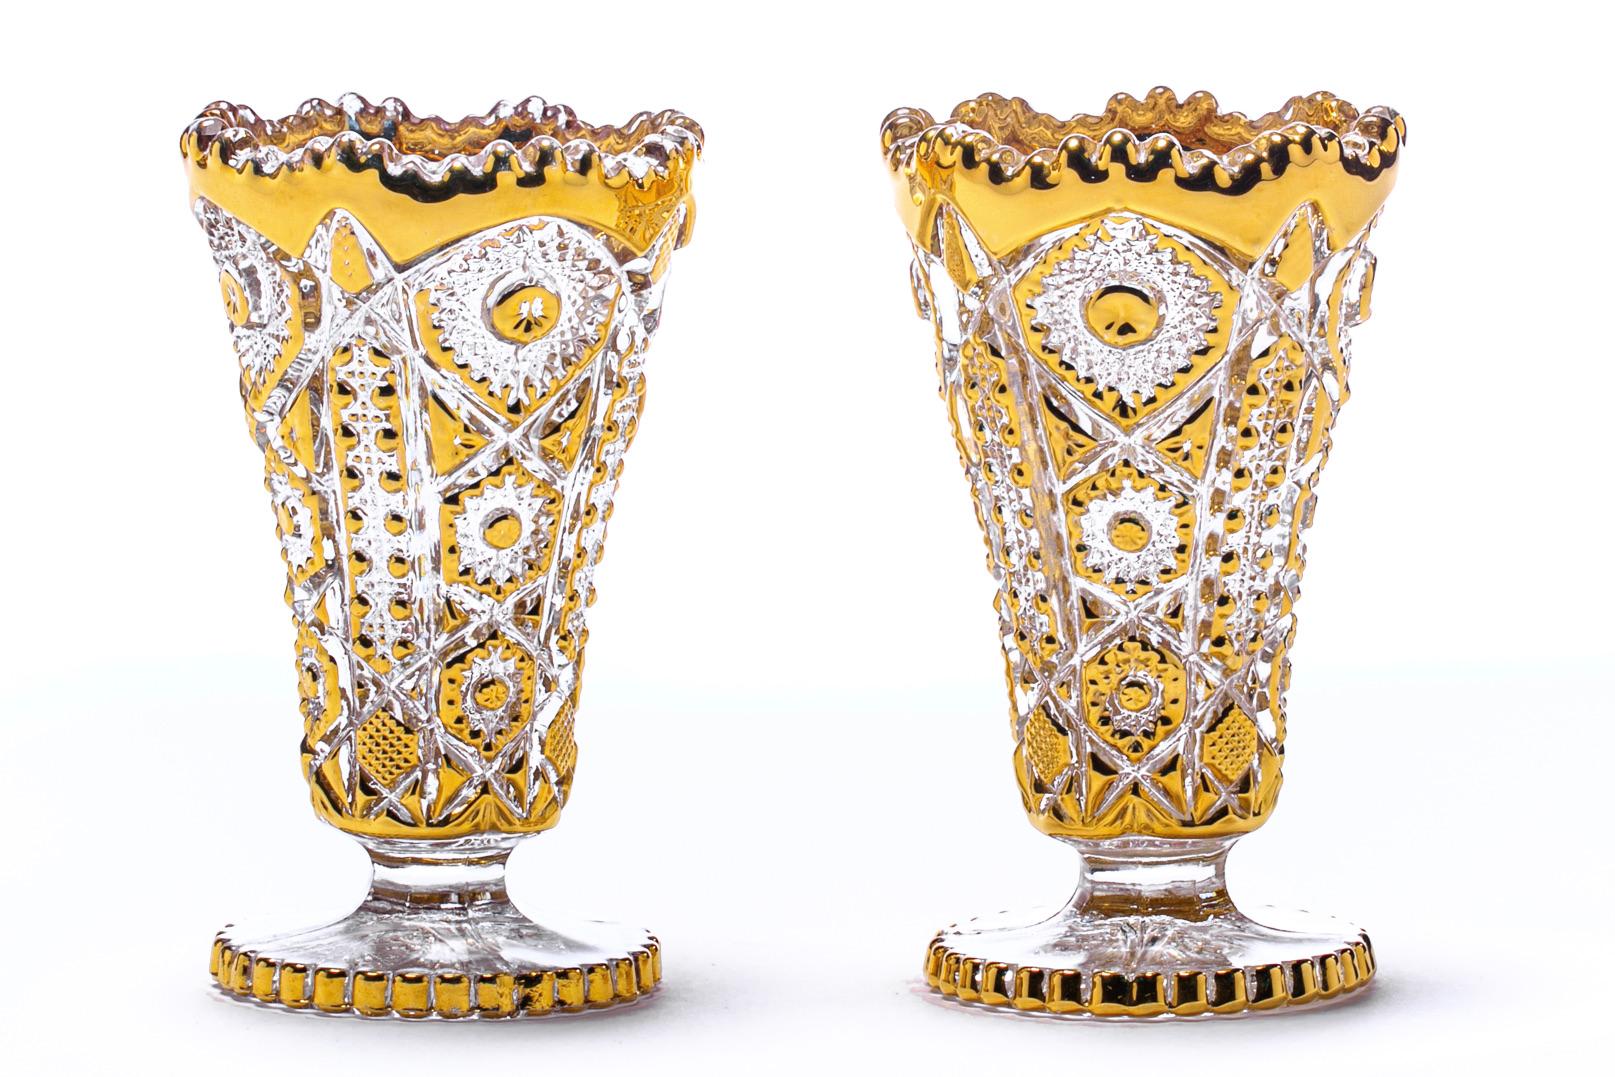 Pair of Hollywood Regency 22k Gold Painted Vases by Imperial Glass Co. c. 1965 In Good Condition For Sale In Saint Louis, MO